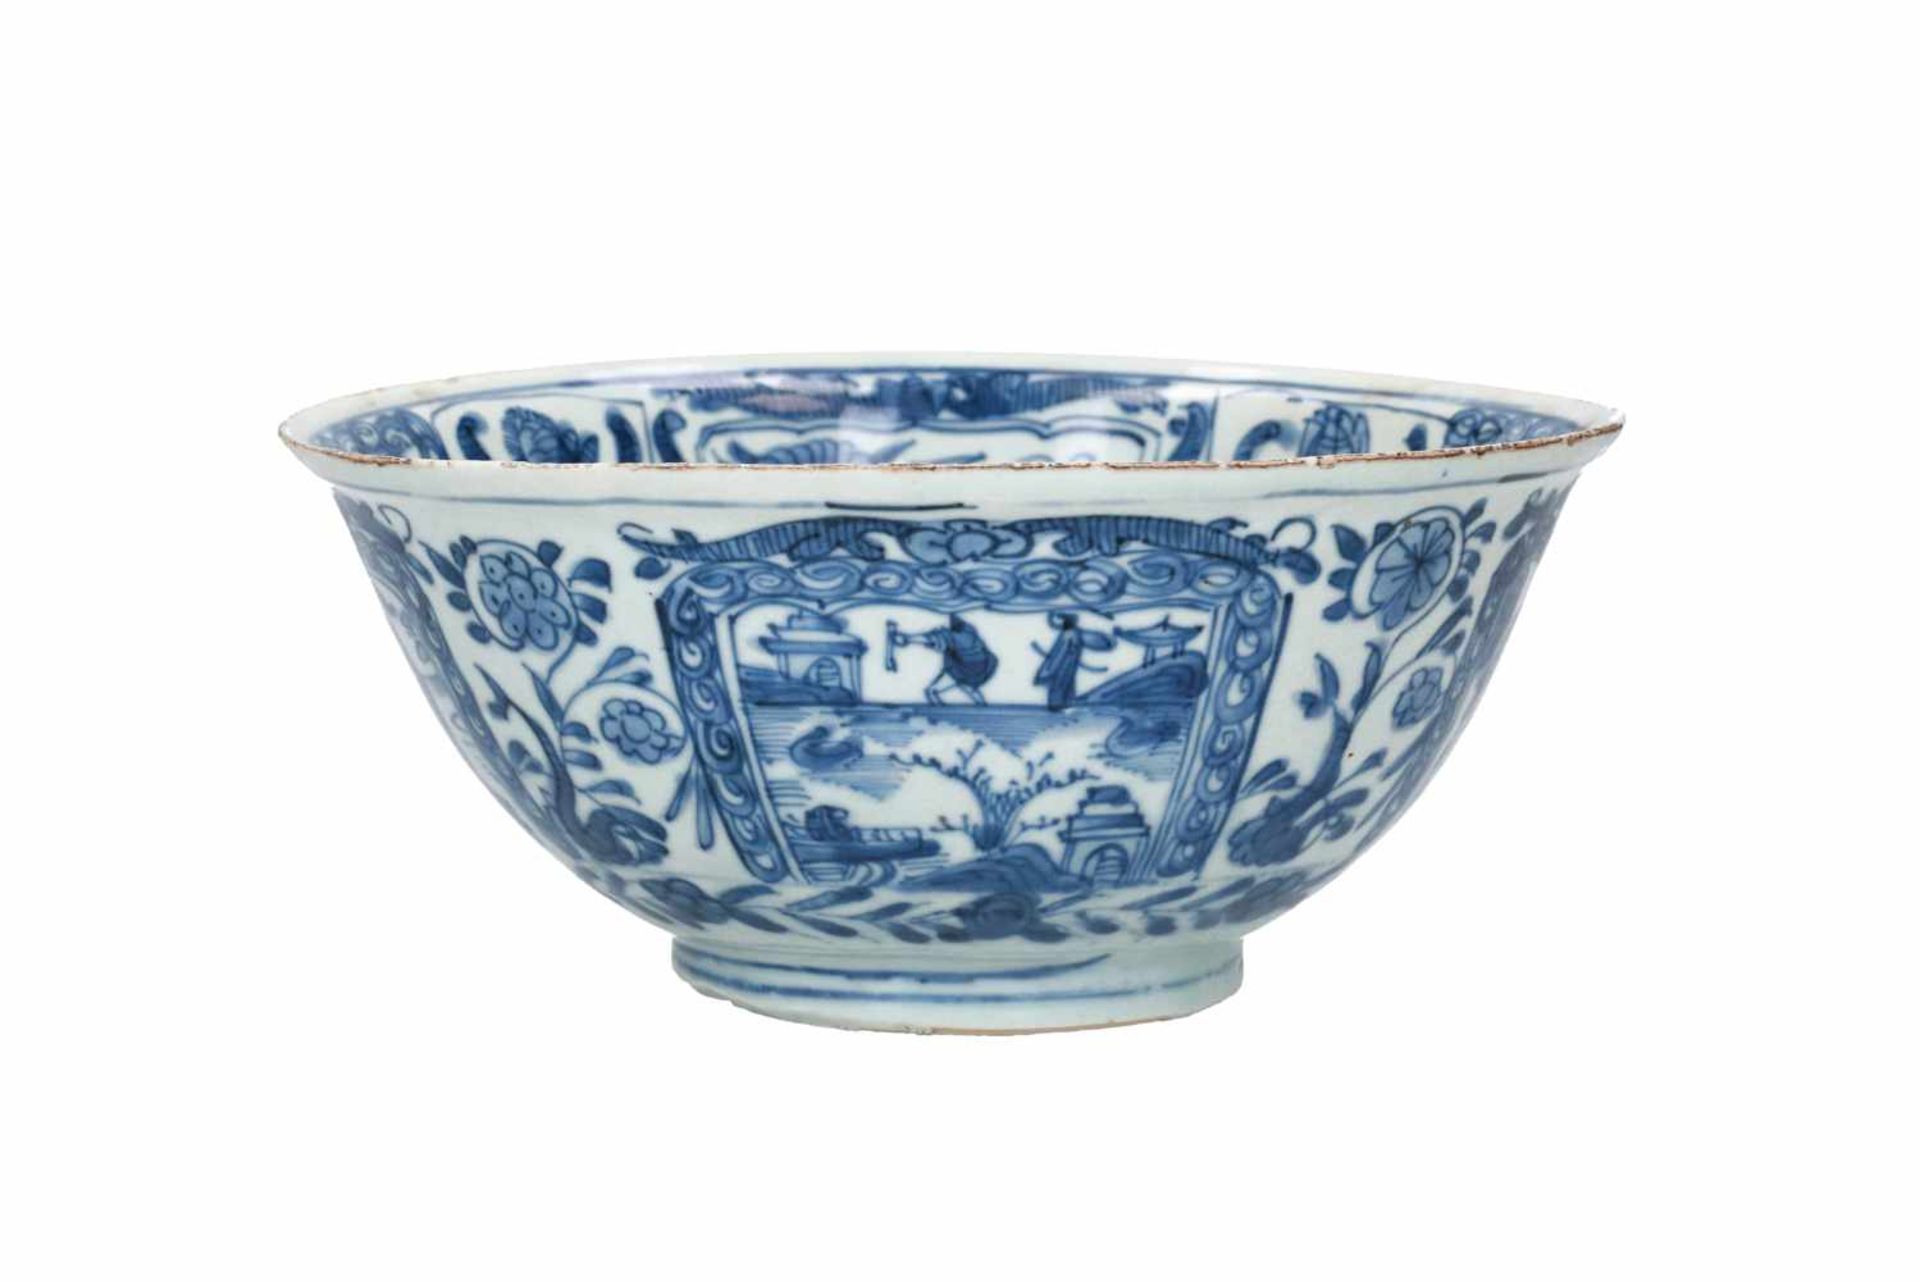 A blue and white porcelain bowl, decorated with figures, tulips and landscapes. Unmarked. China,